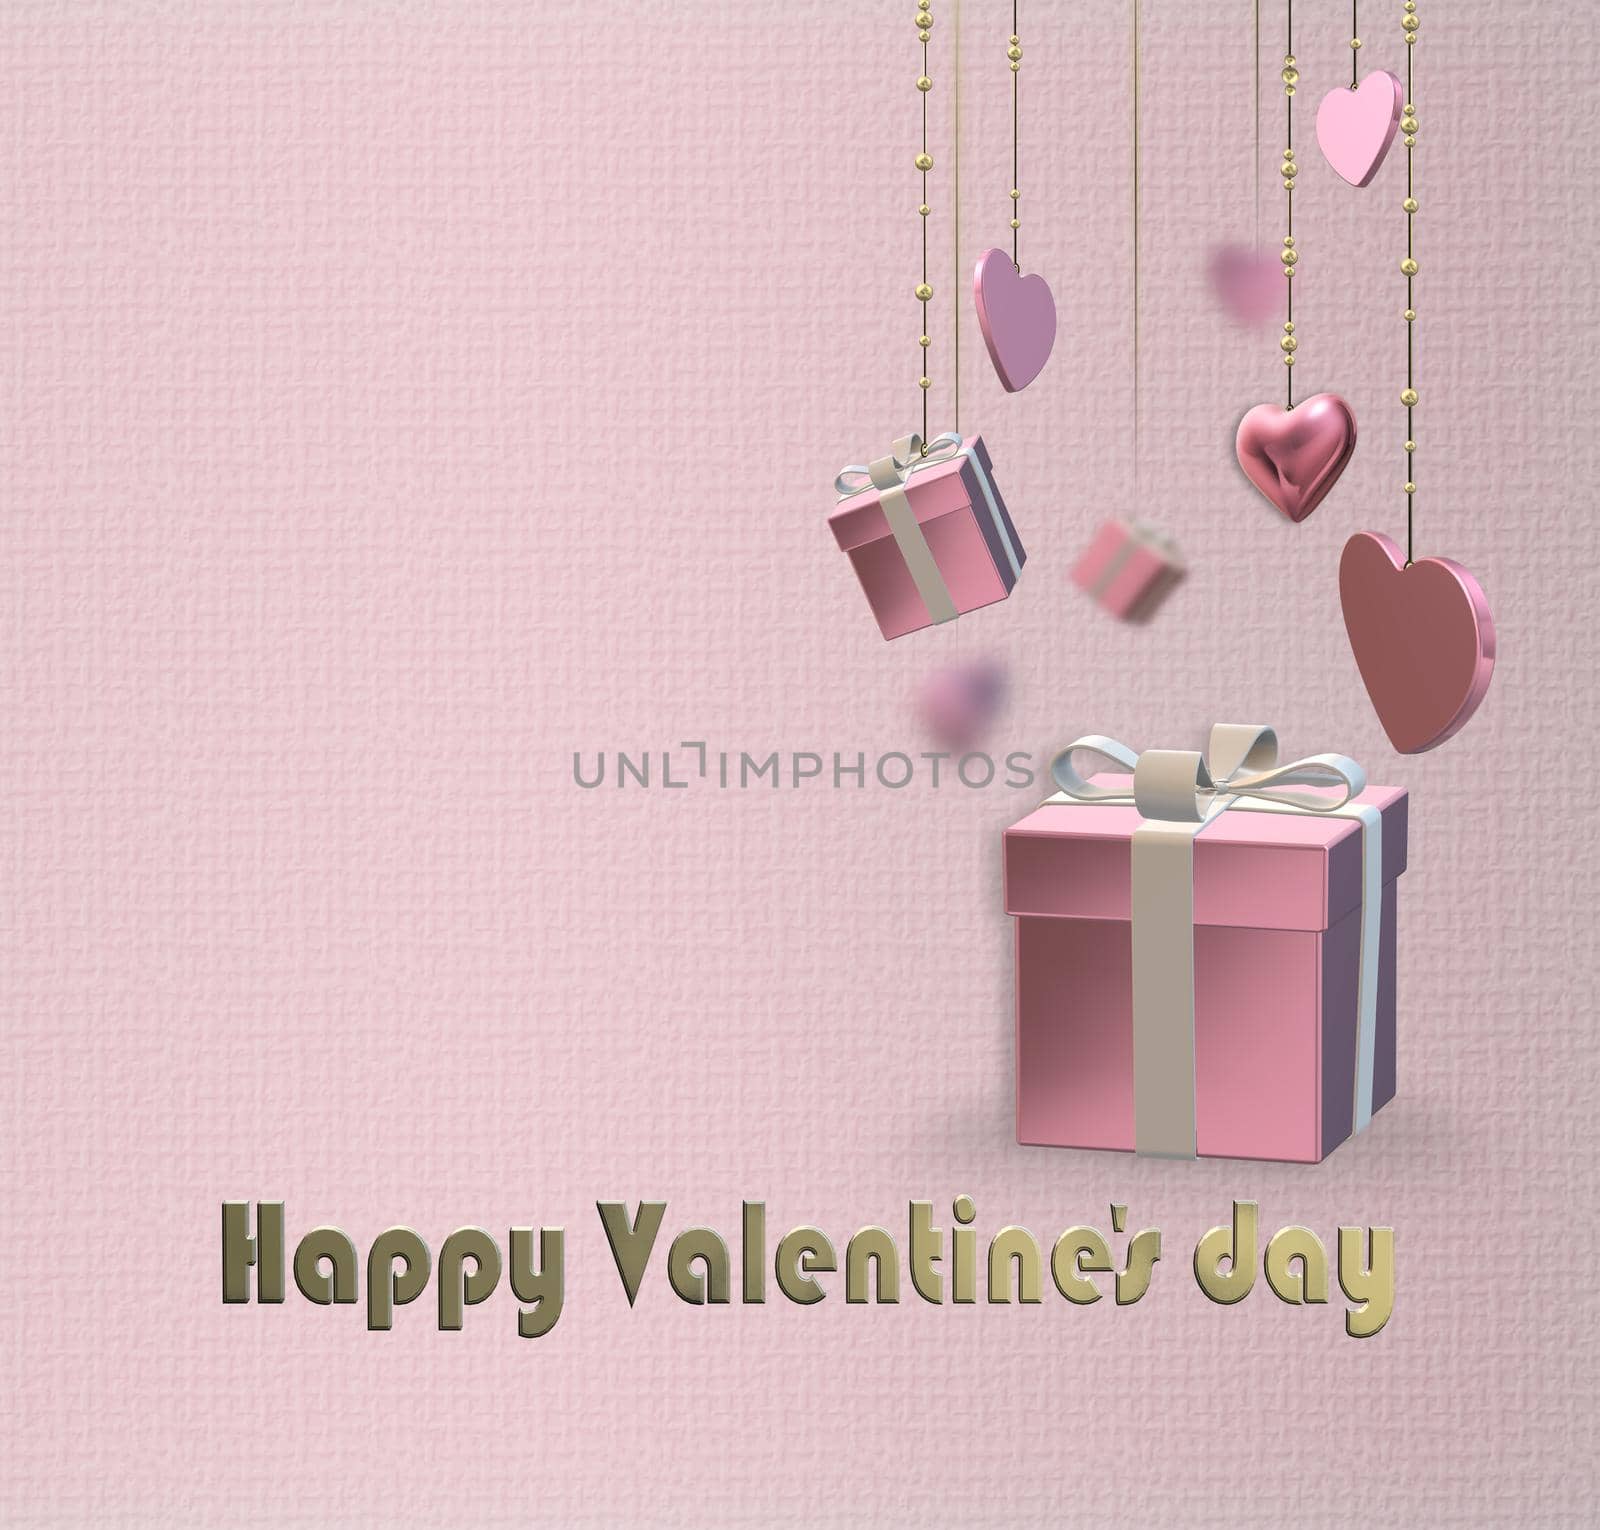 Hanging gift boxes and 3D hearts. STmbol of love realistic gift boxes, hearts on pastel pink background. Gold text Happy Valentines day. Love, party invitation, 8th March, wedding, 3D illustration